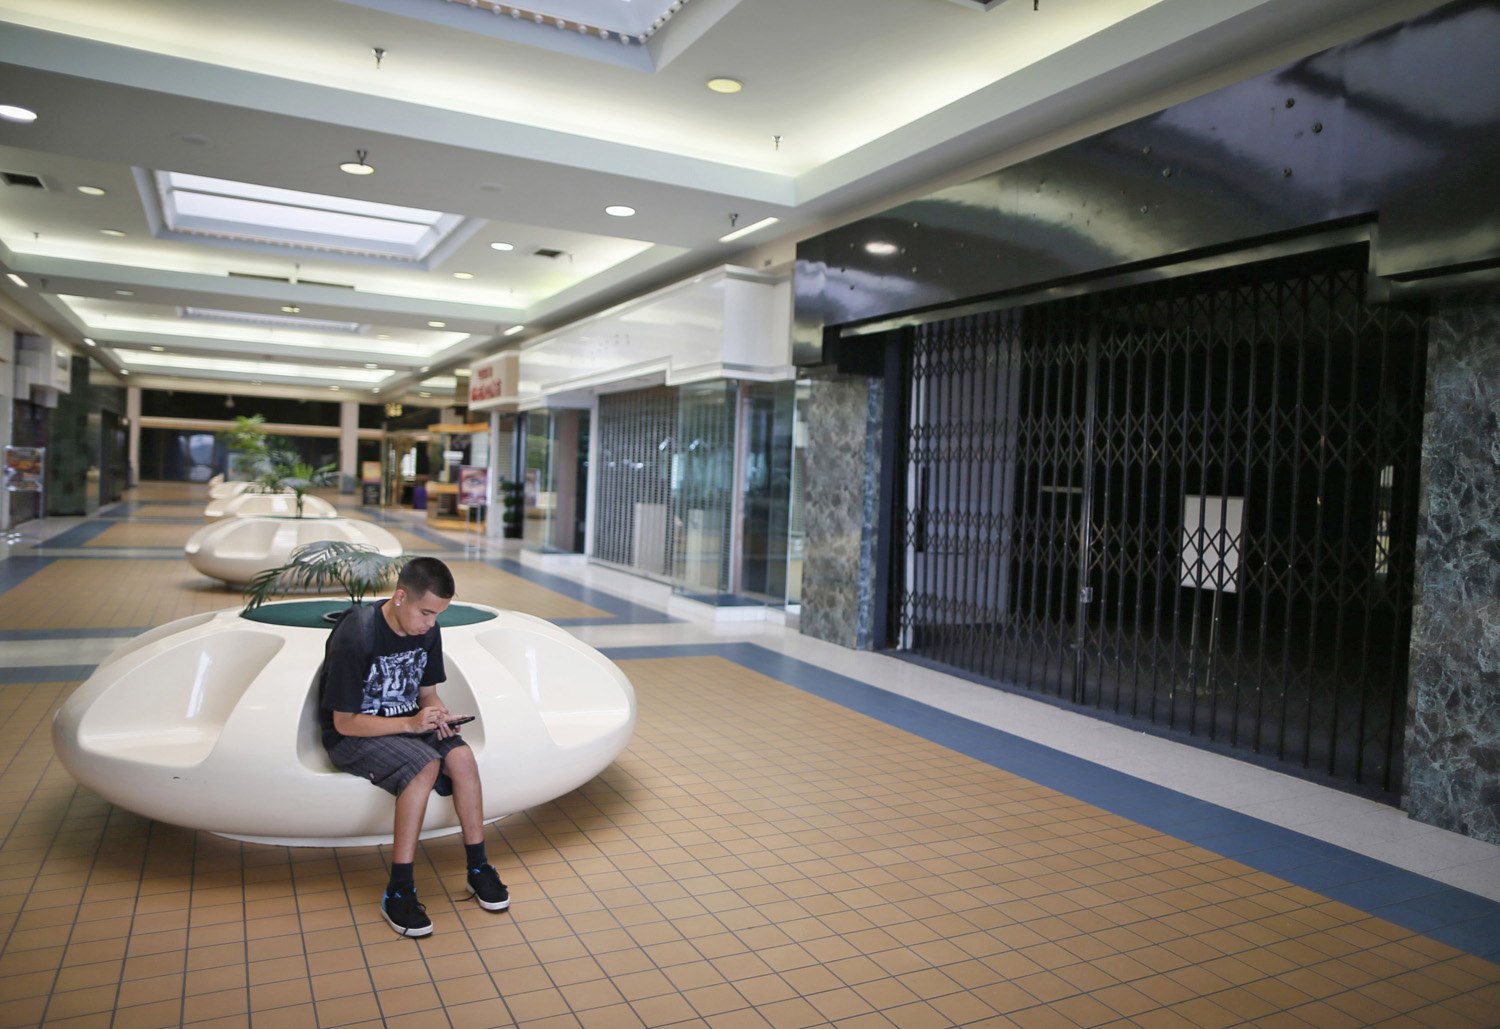 Town Center Mall businesses left in the dark on foreclosure, News